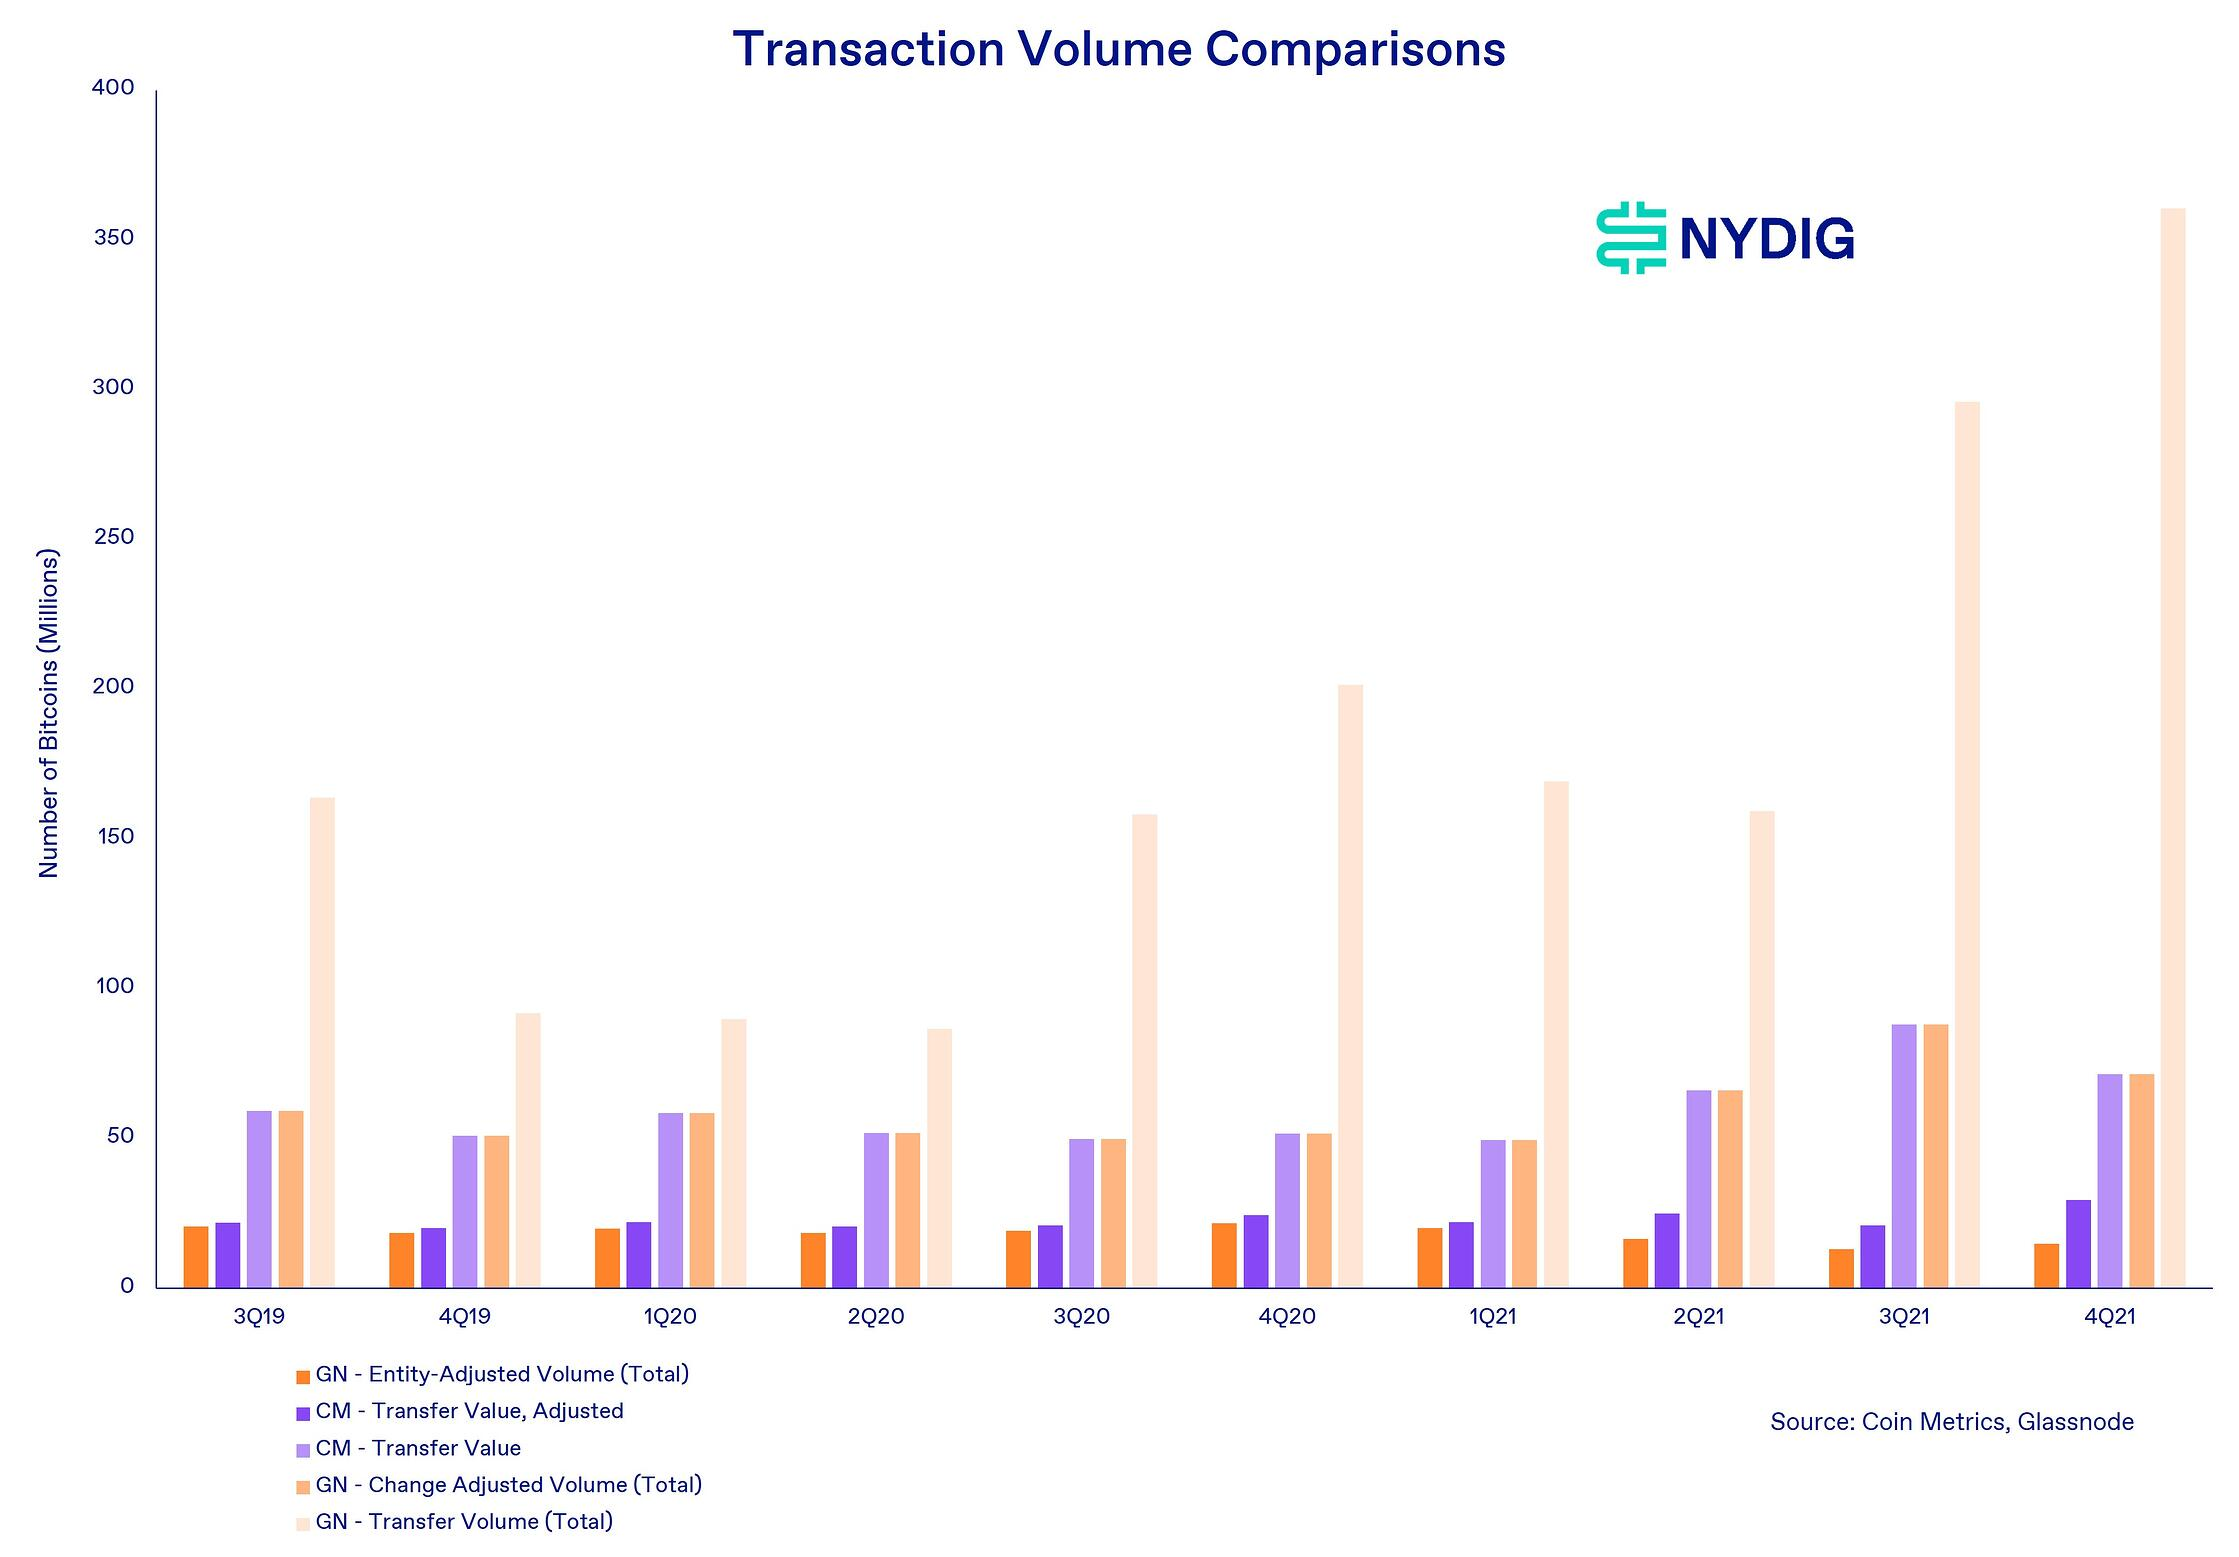 https://viewemail.nydig.com/the-complexities-of-measuring-transaction-volumes